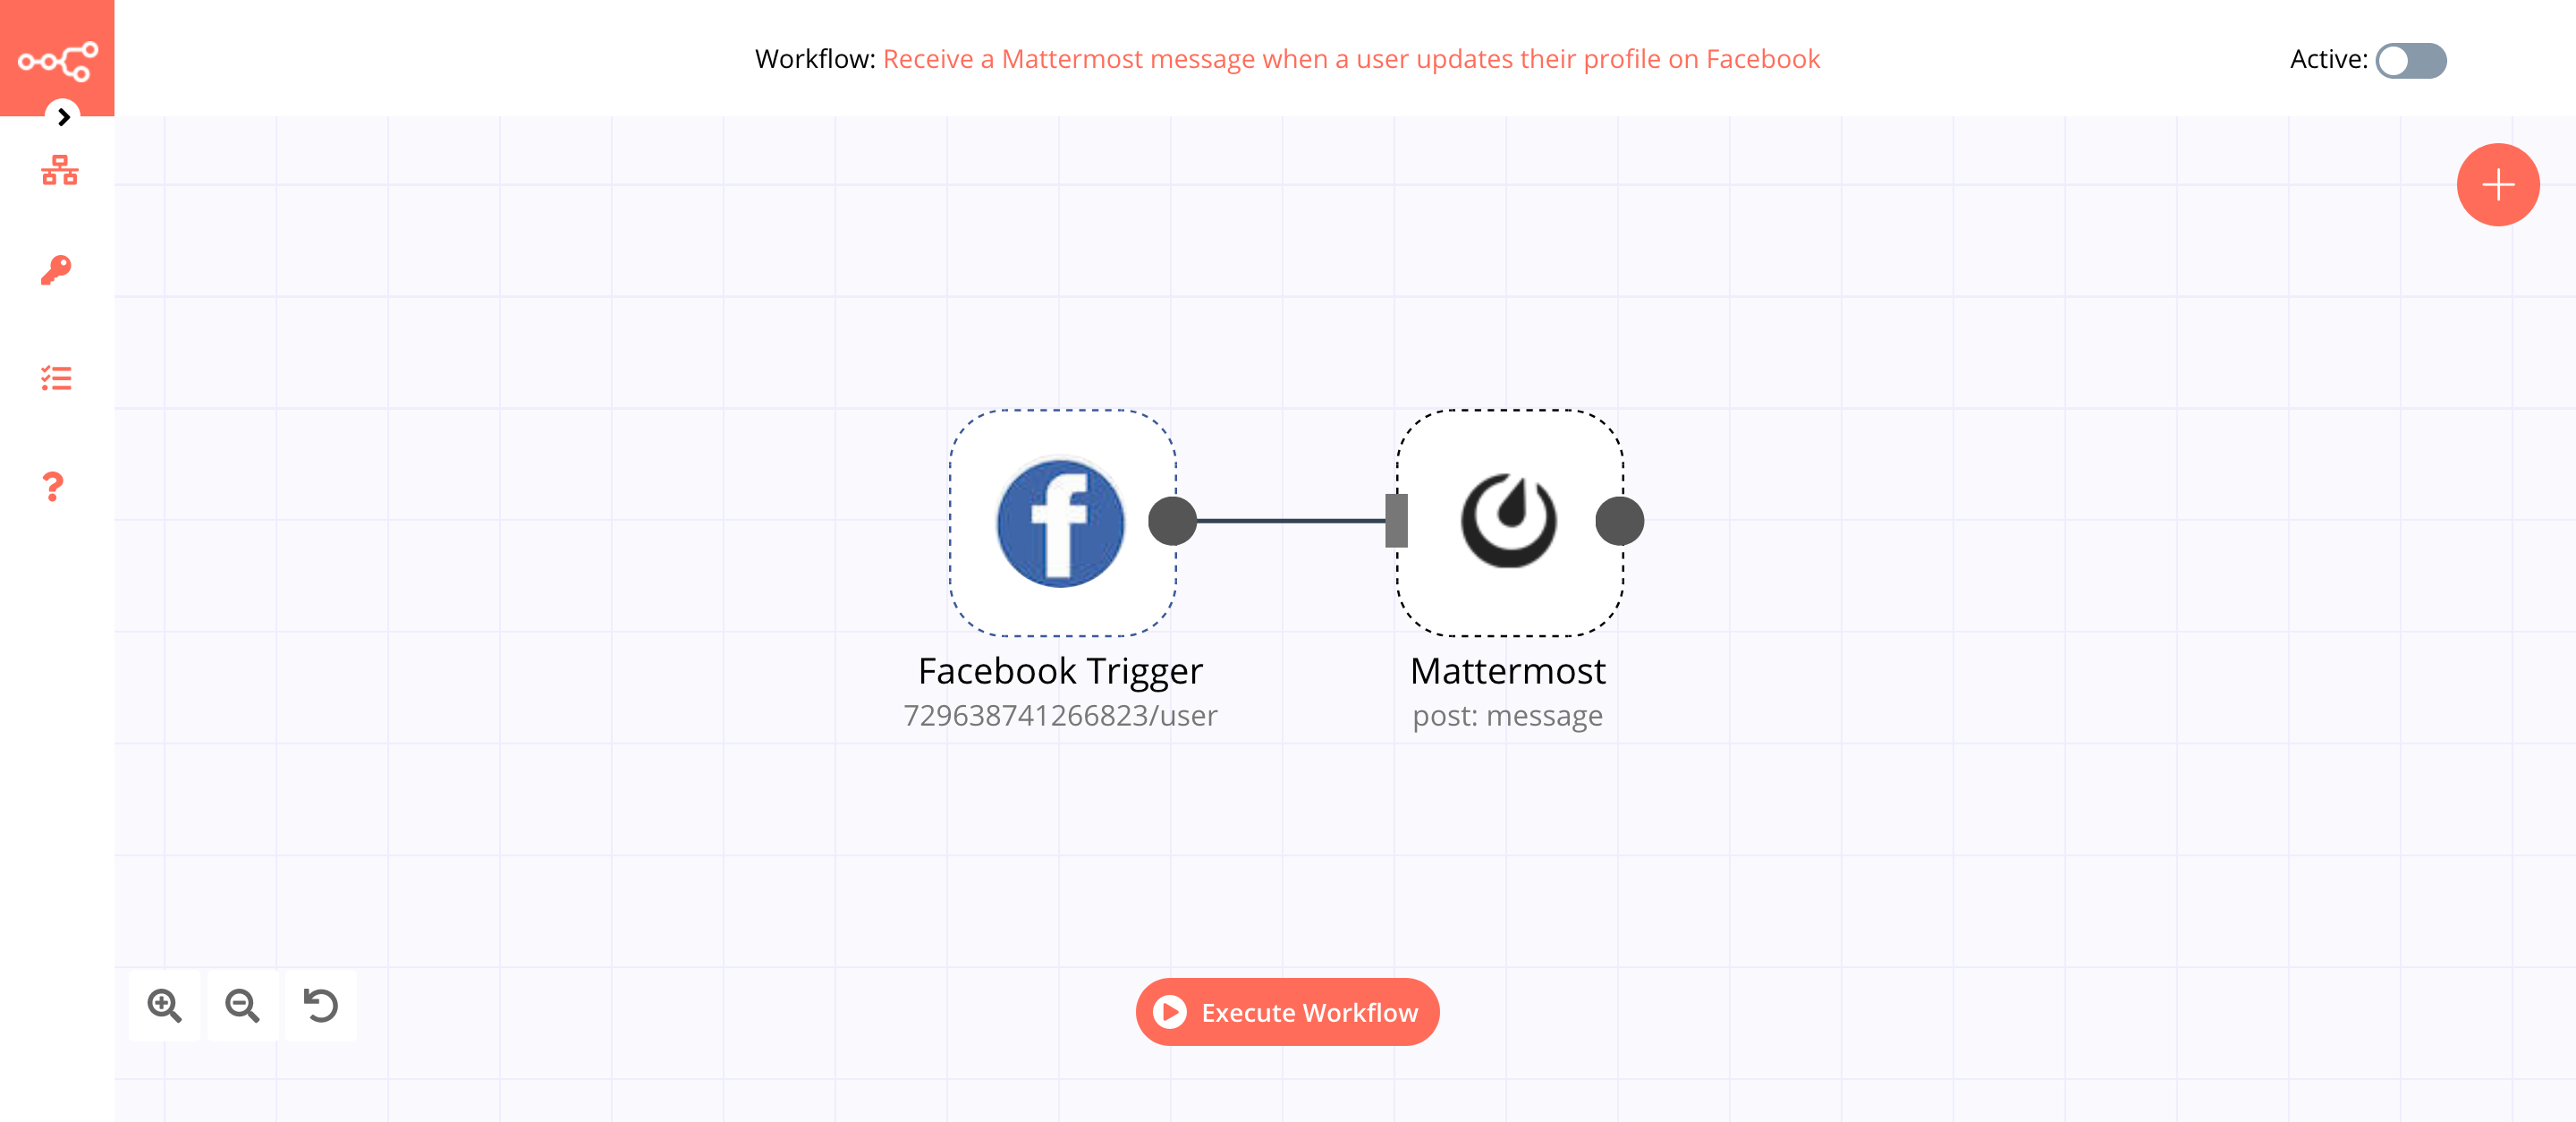 A workflow with the Facebook Trigger node